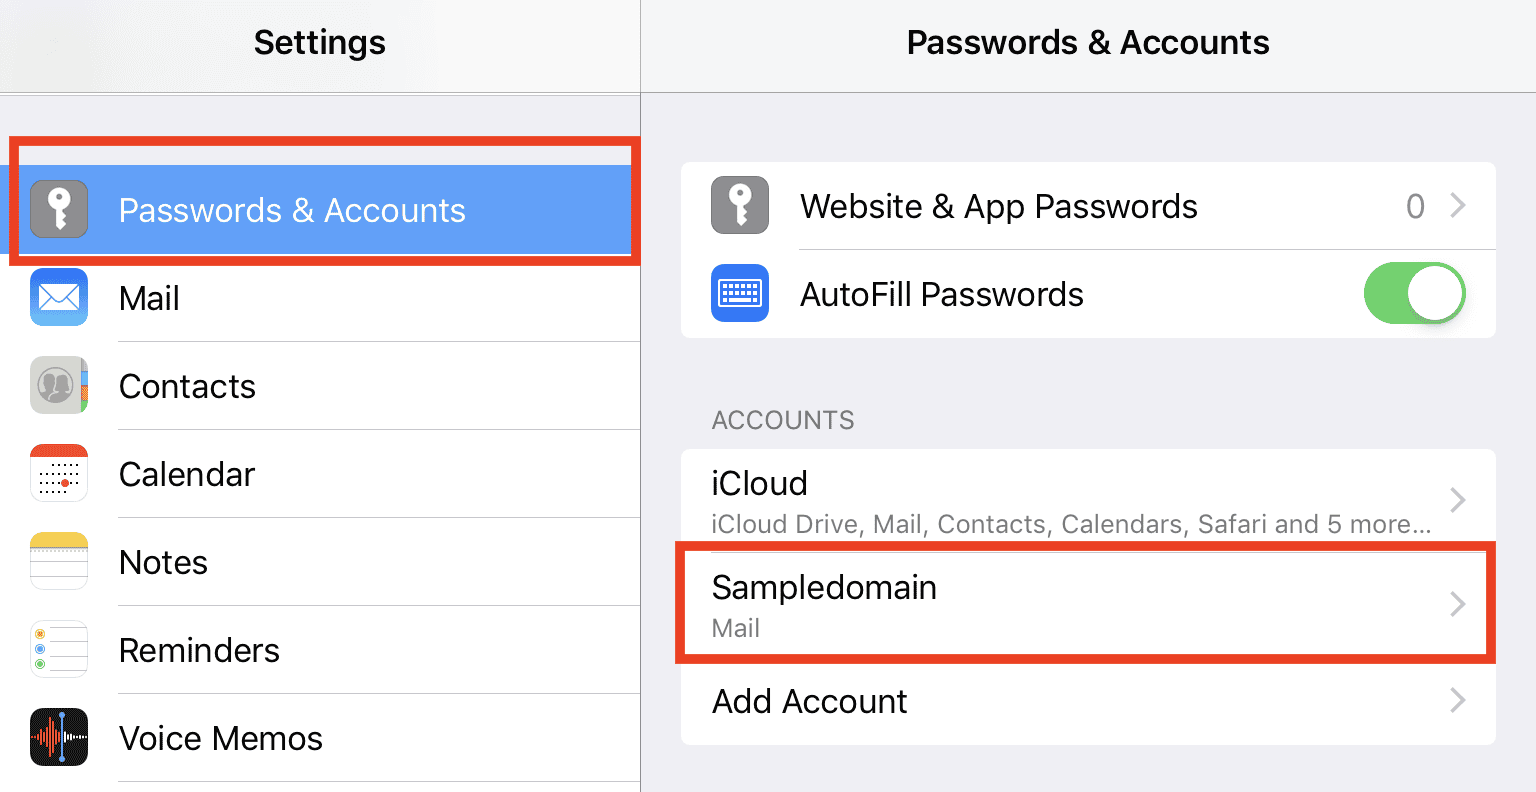 iPhone passwords and accounts settings